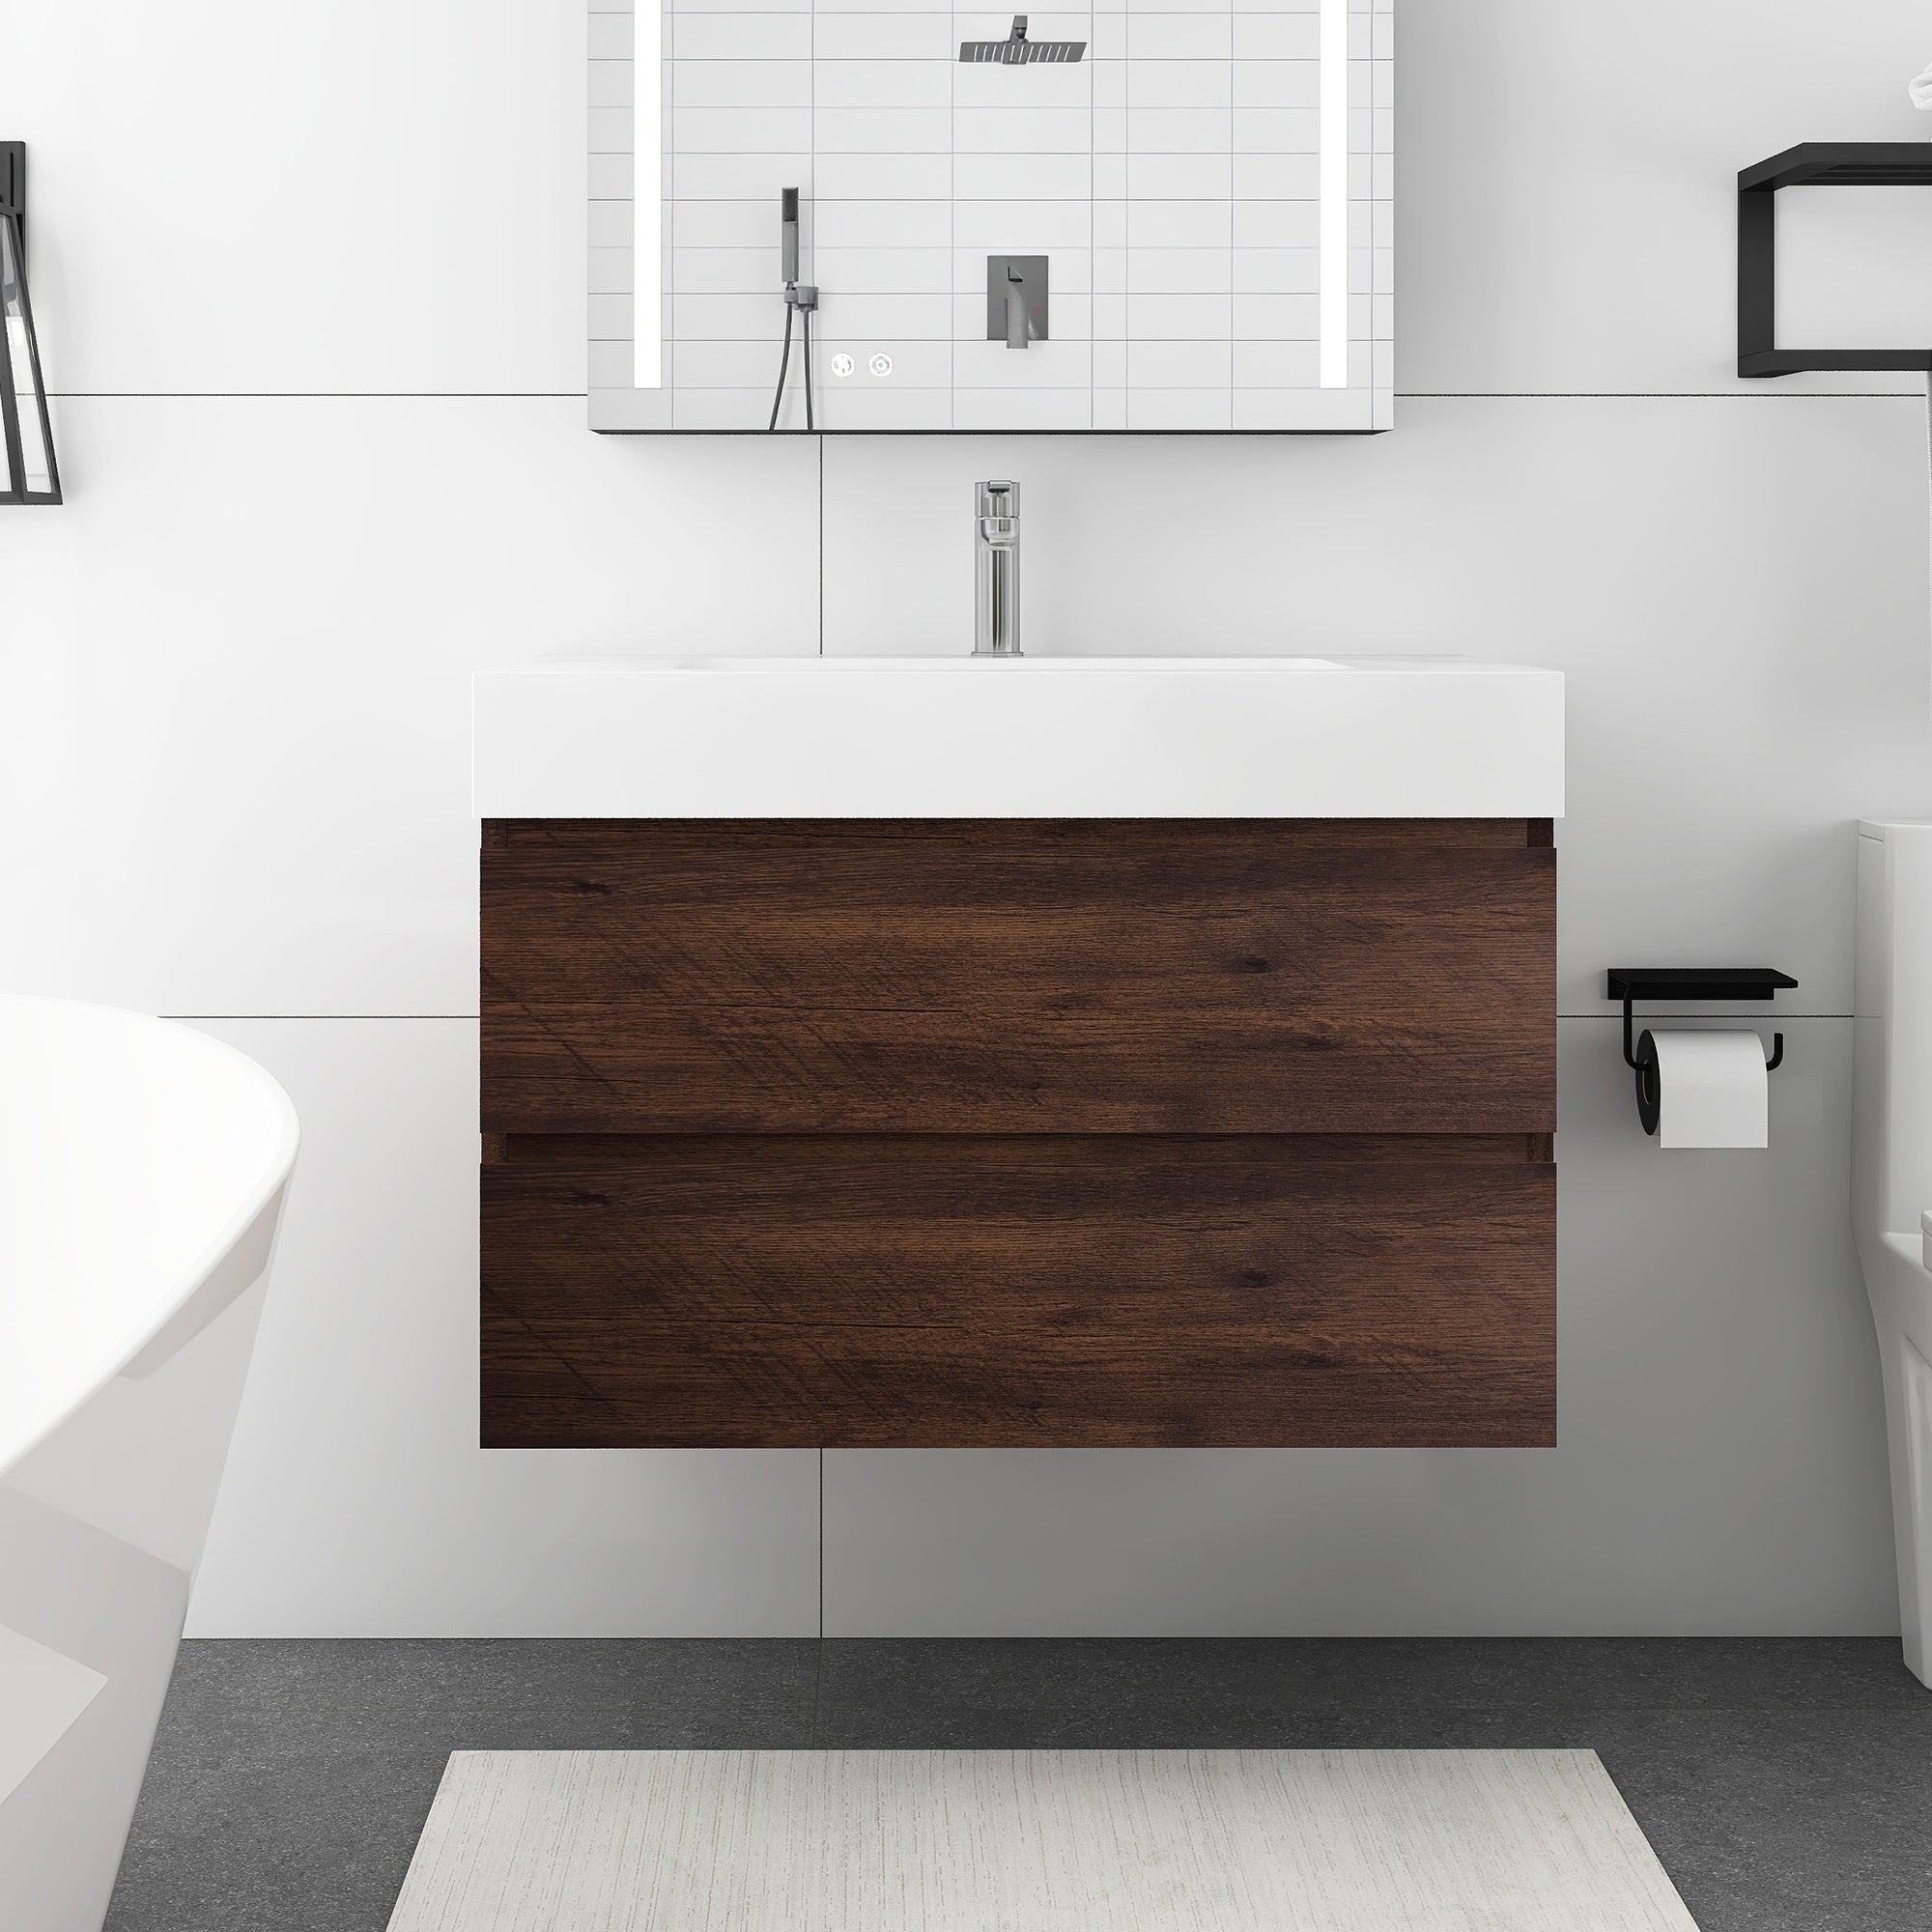 Staykiwi Wall-Mounted Bathroom Vanity Set with Integrated Solid Surface Sink